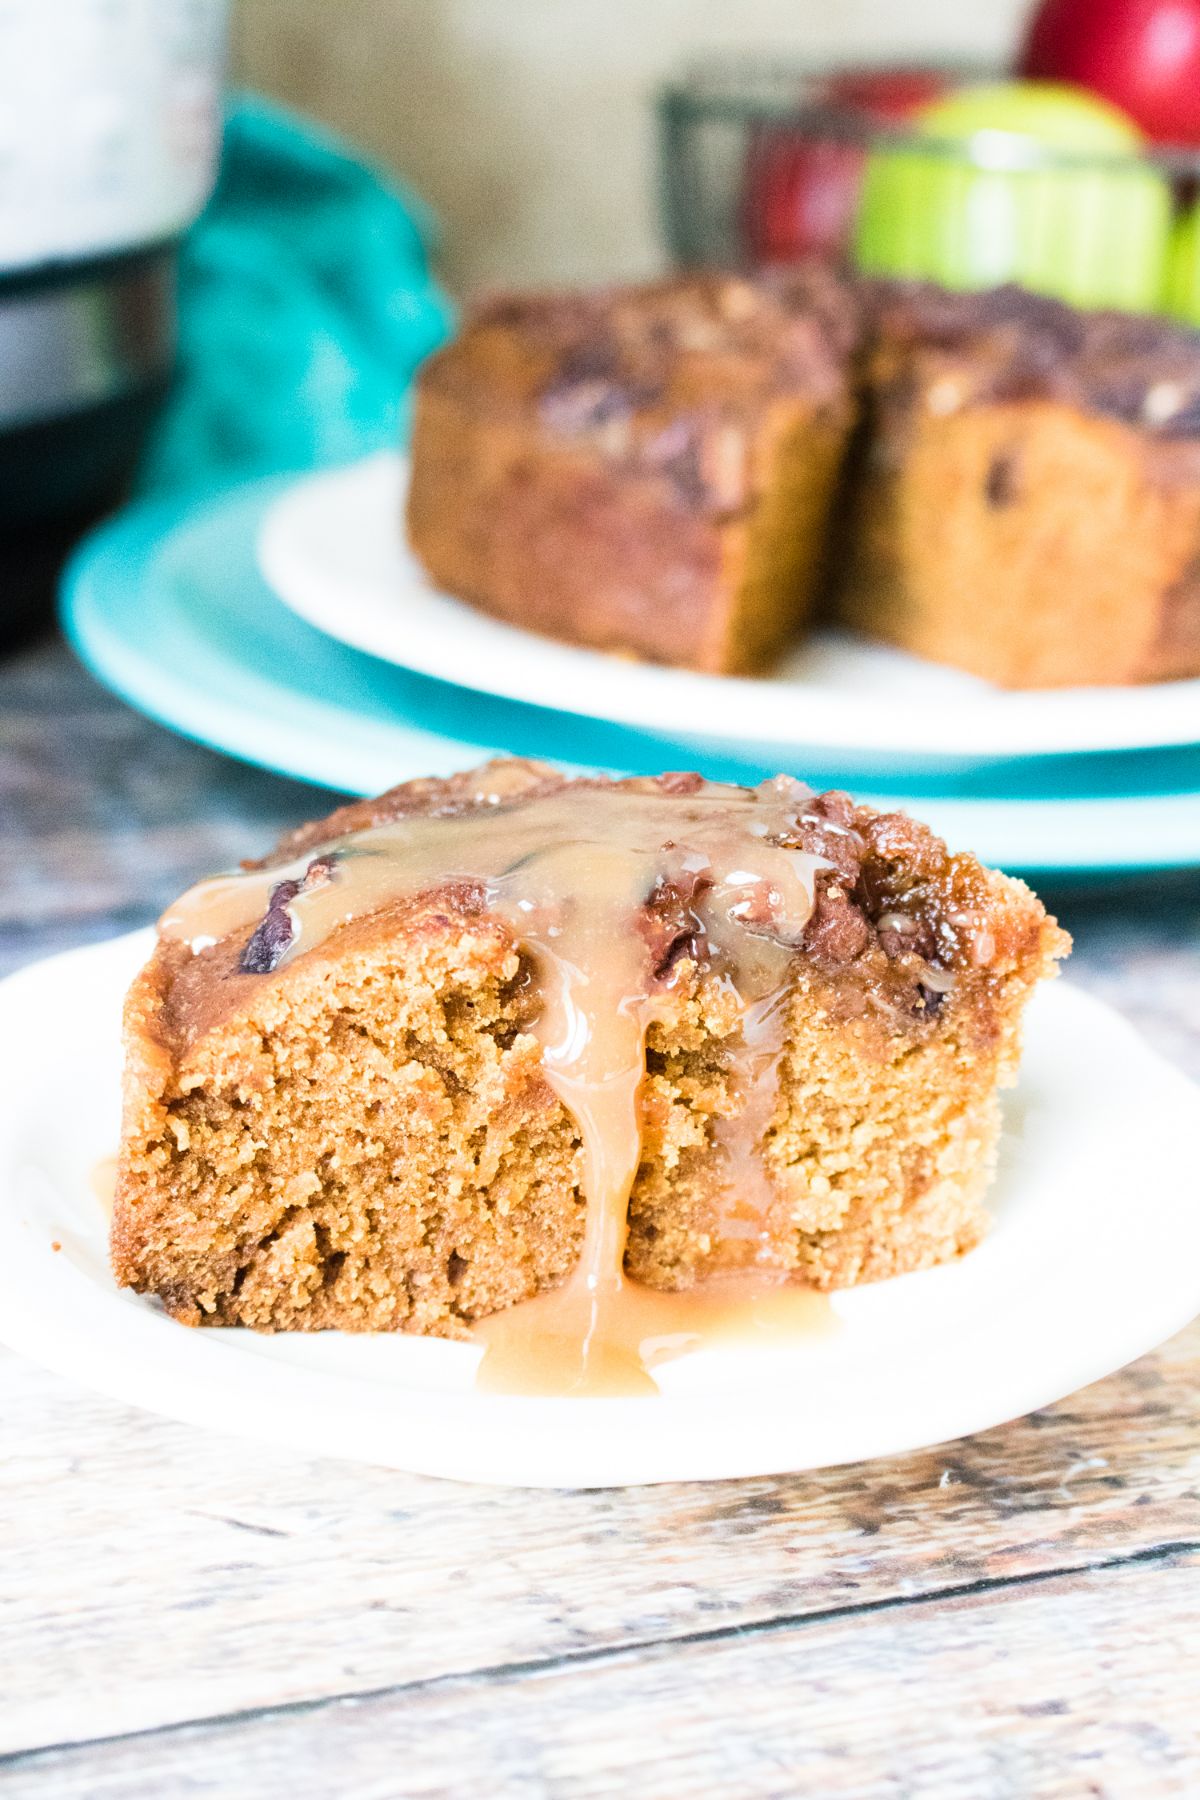 Applesauce Snack Cake with Brown Sugar Frosting Recipe